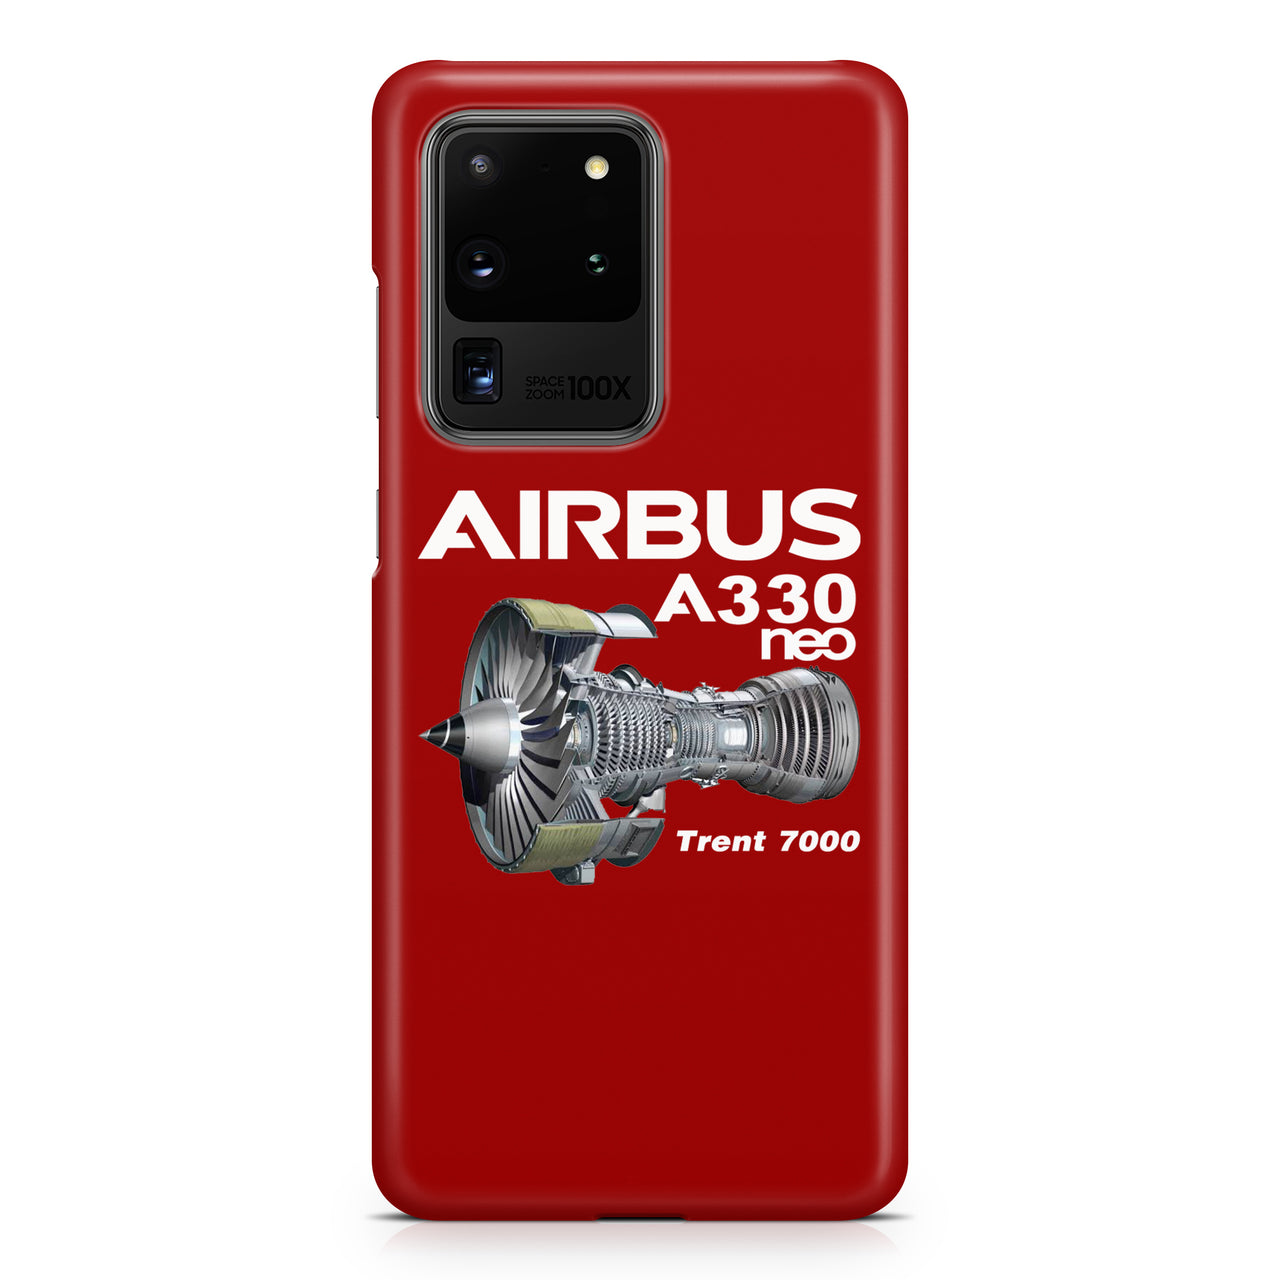 Airbus A330neo & Trent 7000 Samsung S & Note Cases